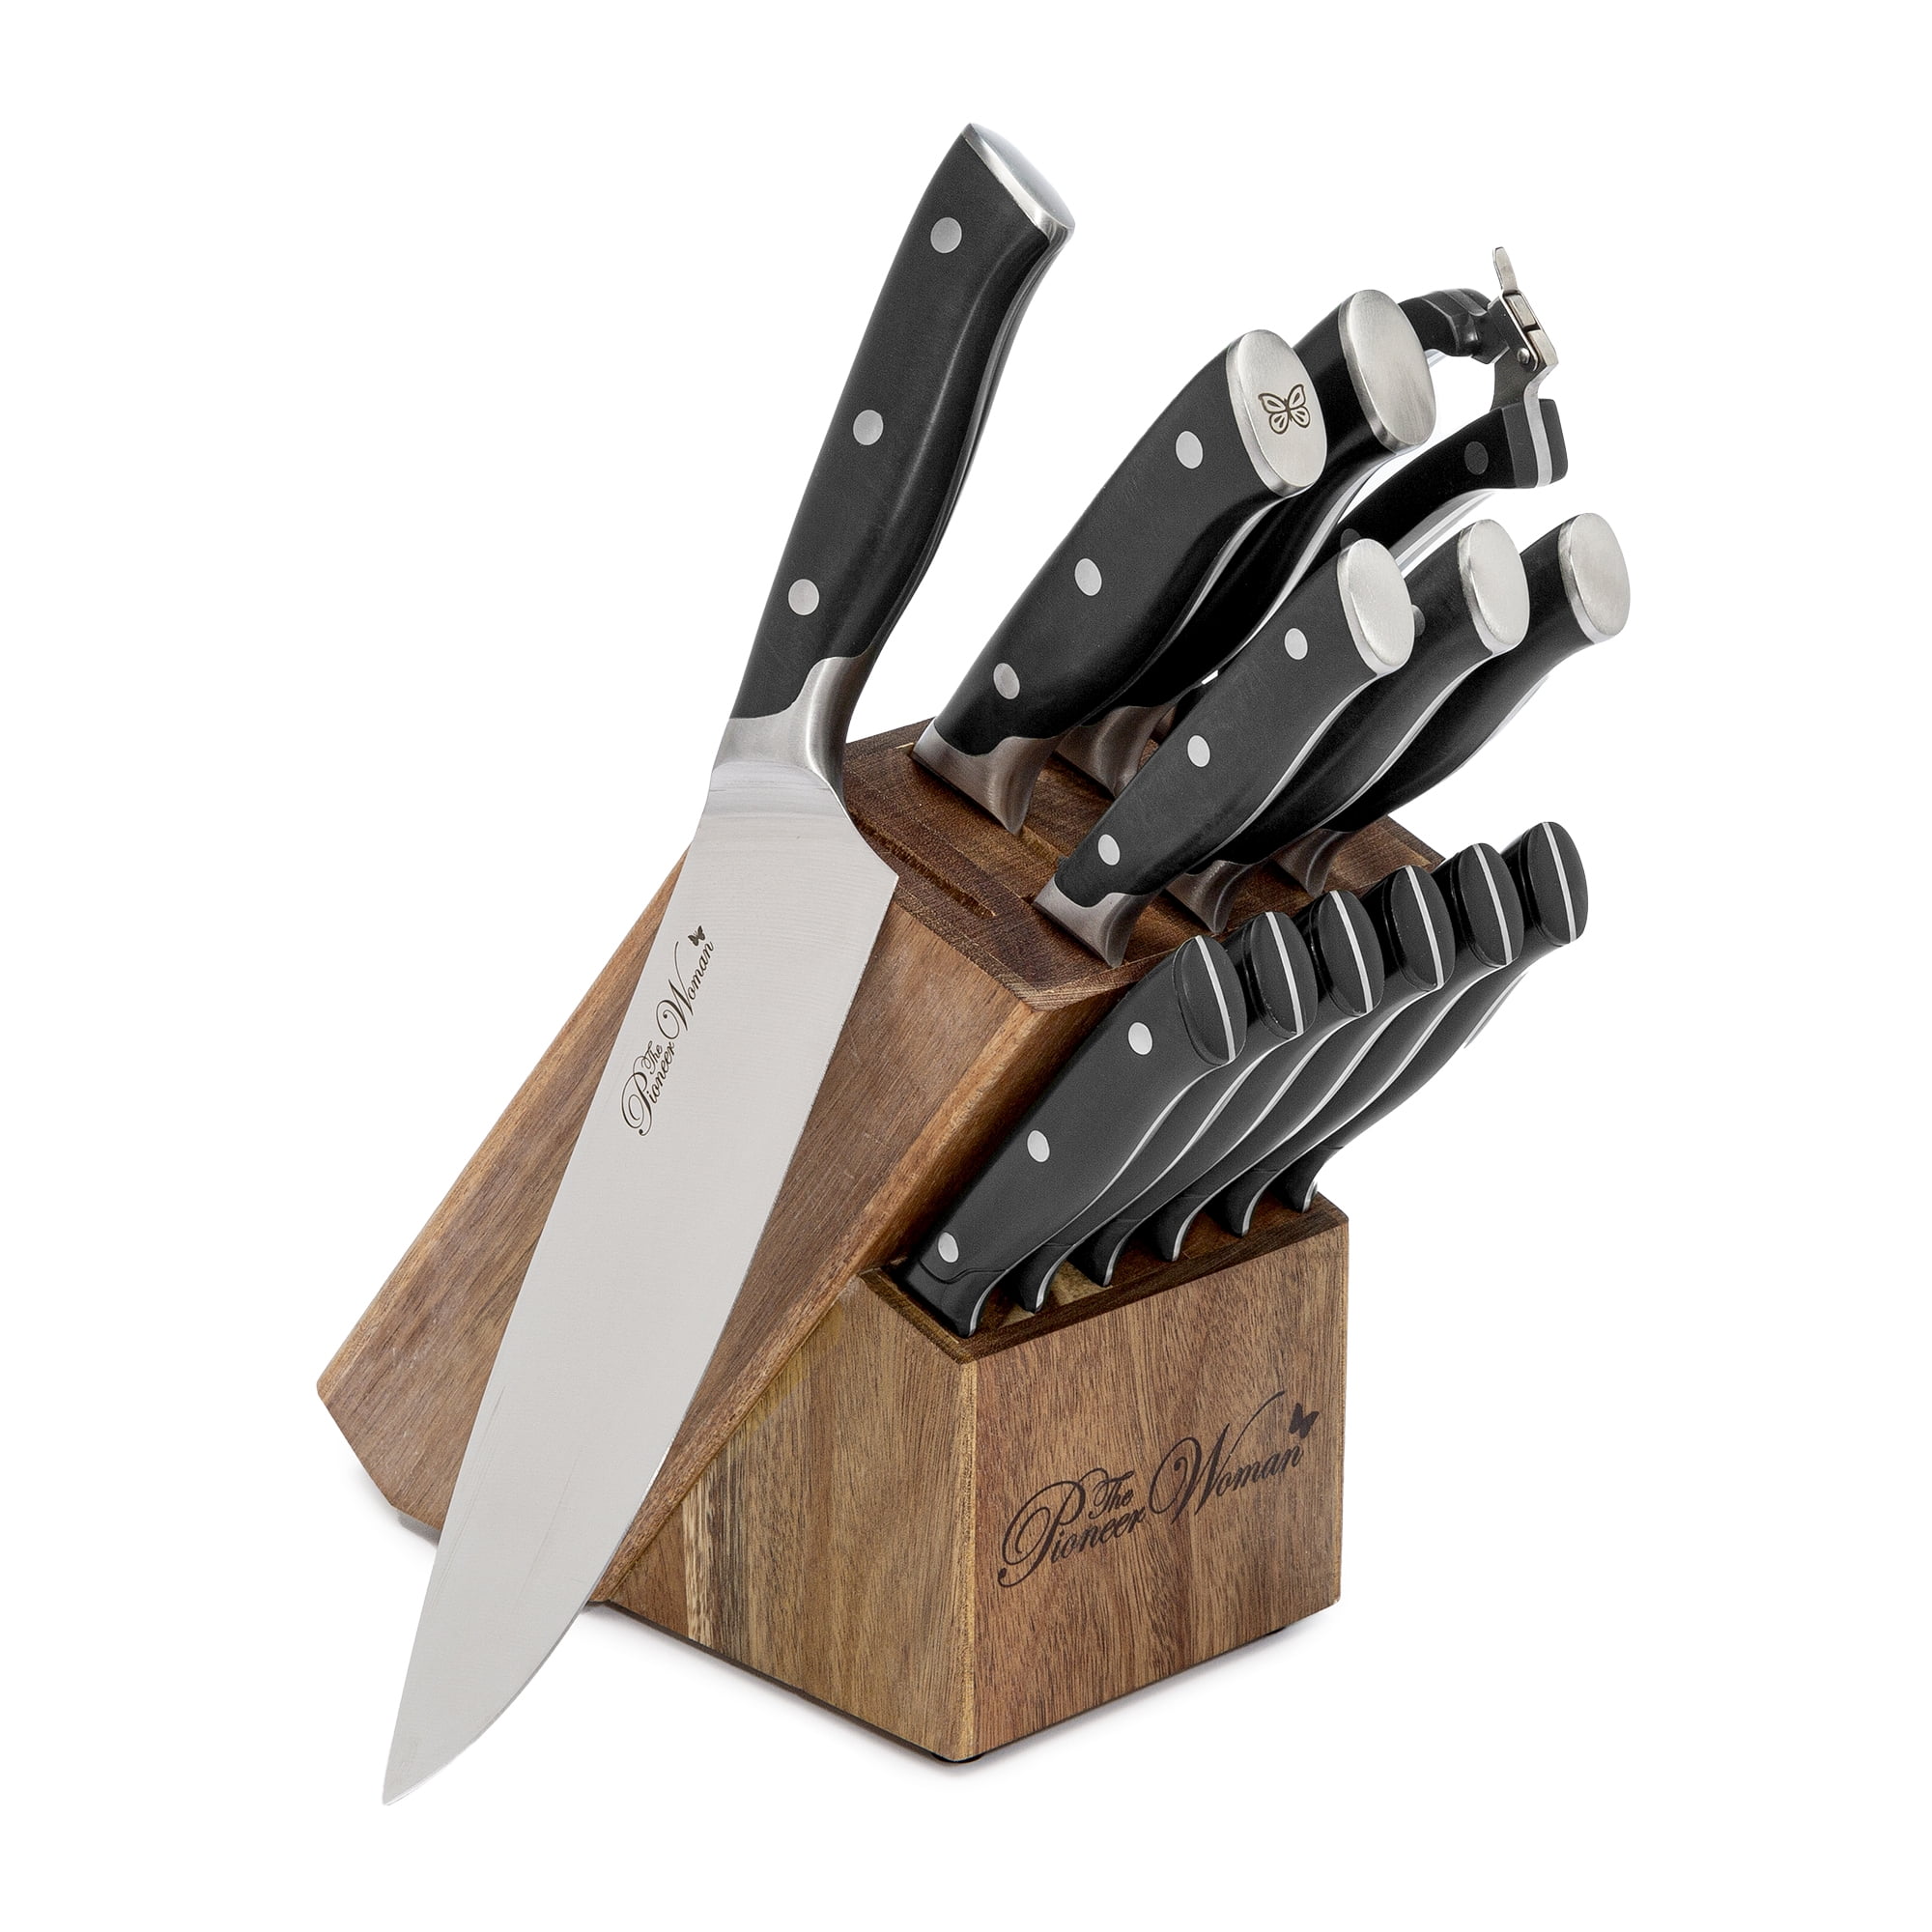 The Pioneer Woman Breezy Blossoms 11-Piece Stainless Steel Knife Block Set,  Teal knives knife set